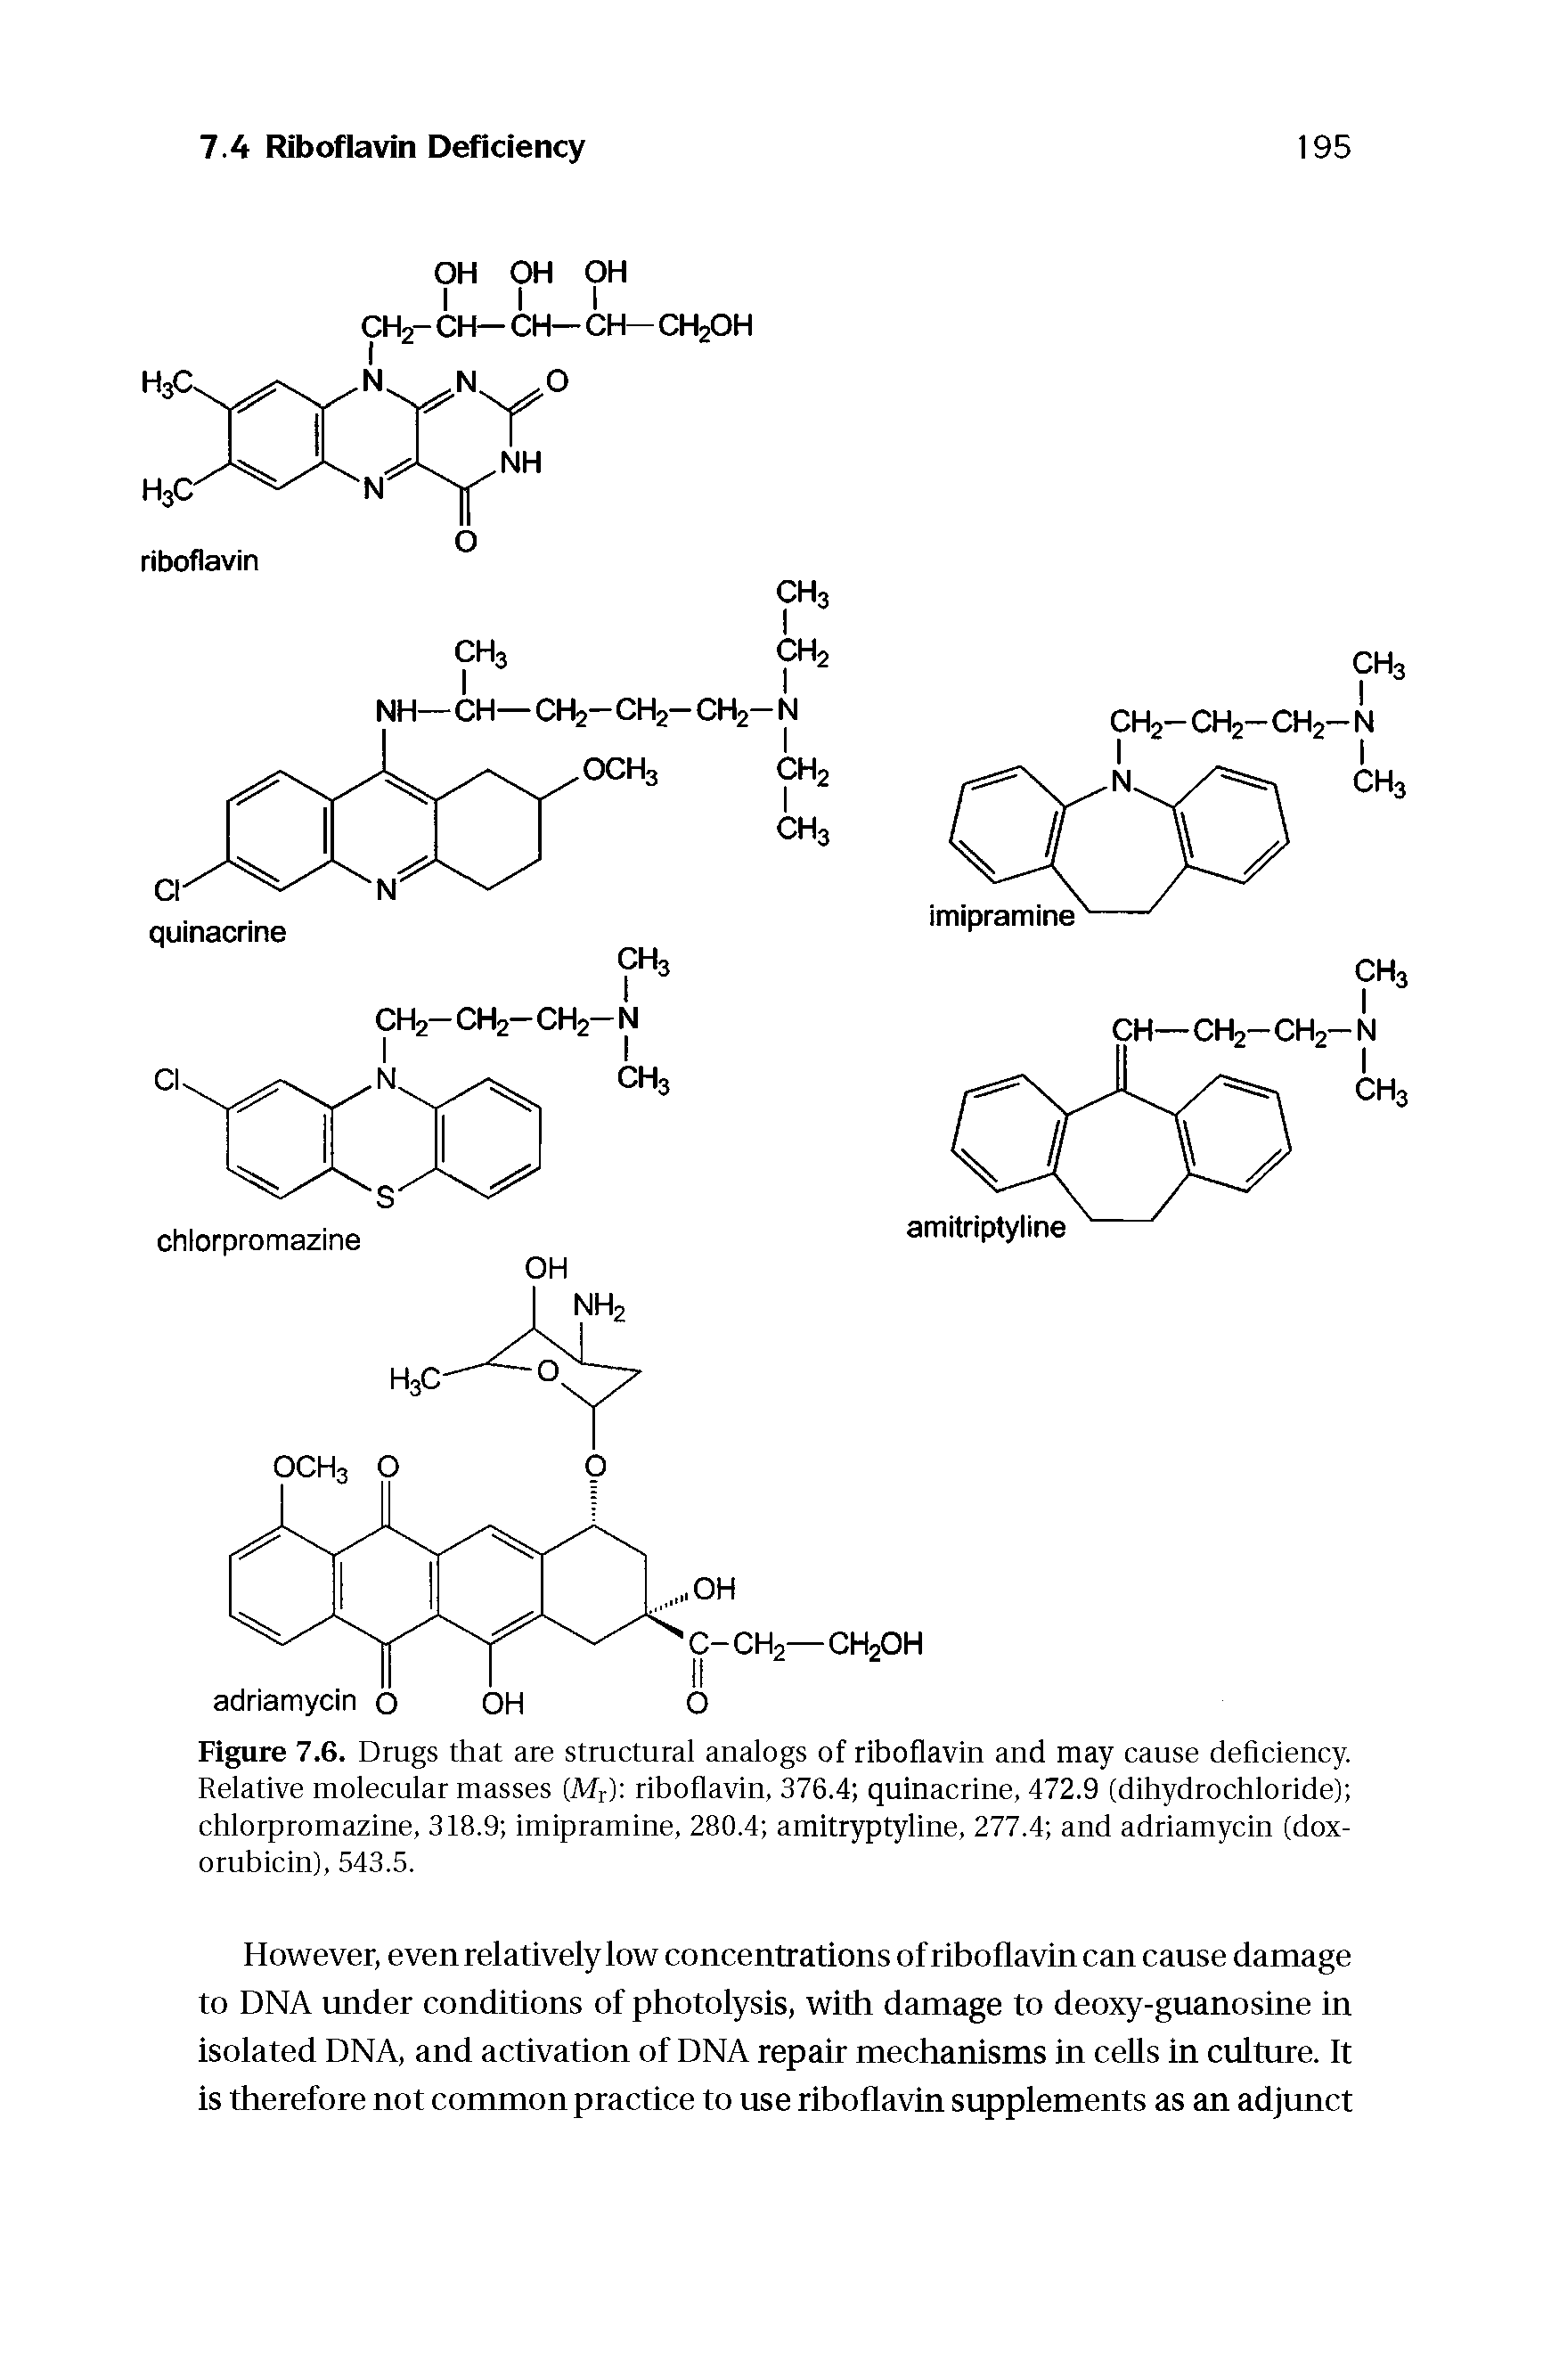 Figure 7.6. Drugs that are structural analogs of riboflavin and may cause deficiency. Relative molecular masses (Mr) riboflavin, 376.4 quinacrine, 472.9 (dihydrochloride) chlorpromazine, 318.9 imipramine, 280.4 amitryptyline, 277.4 and adriamycin (doxorubicin), 543.5.